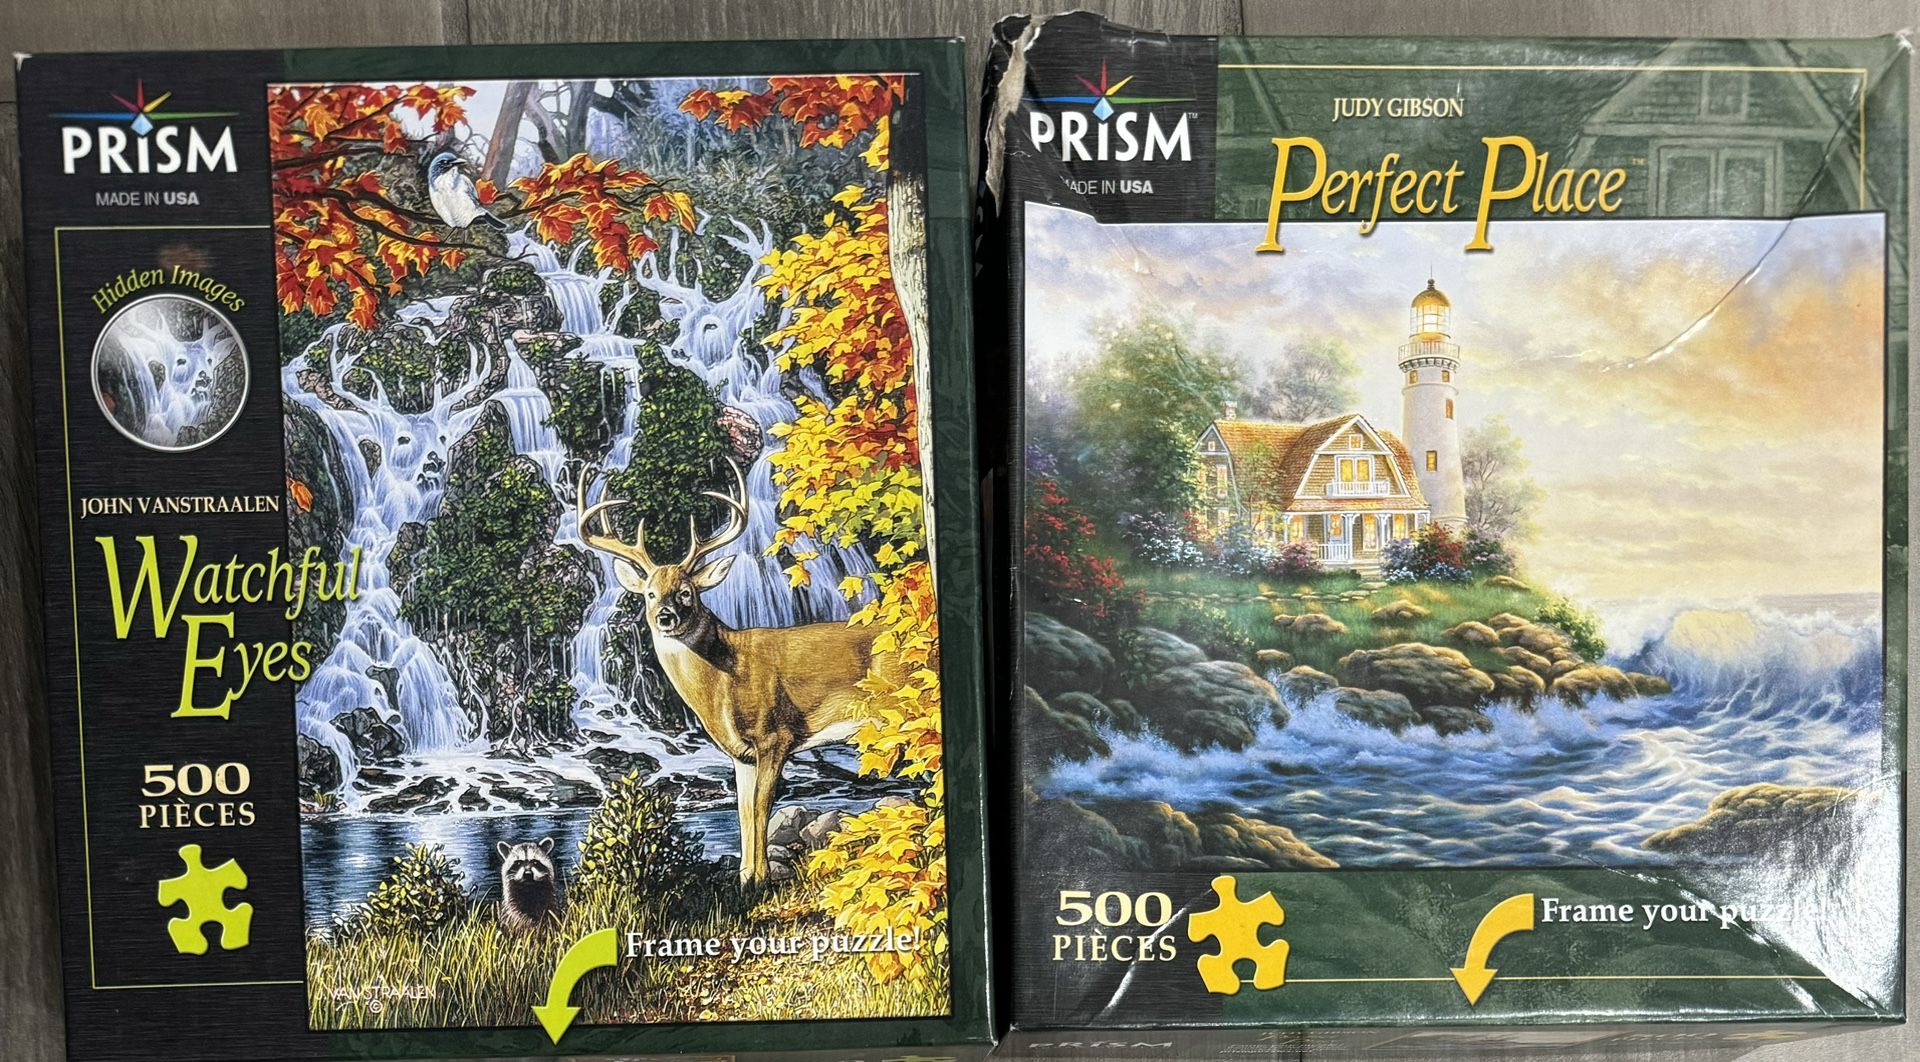 Lot of 2 Prism 500 piece puzzles “Watchful Eyes” and “Peaceful Place”